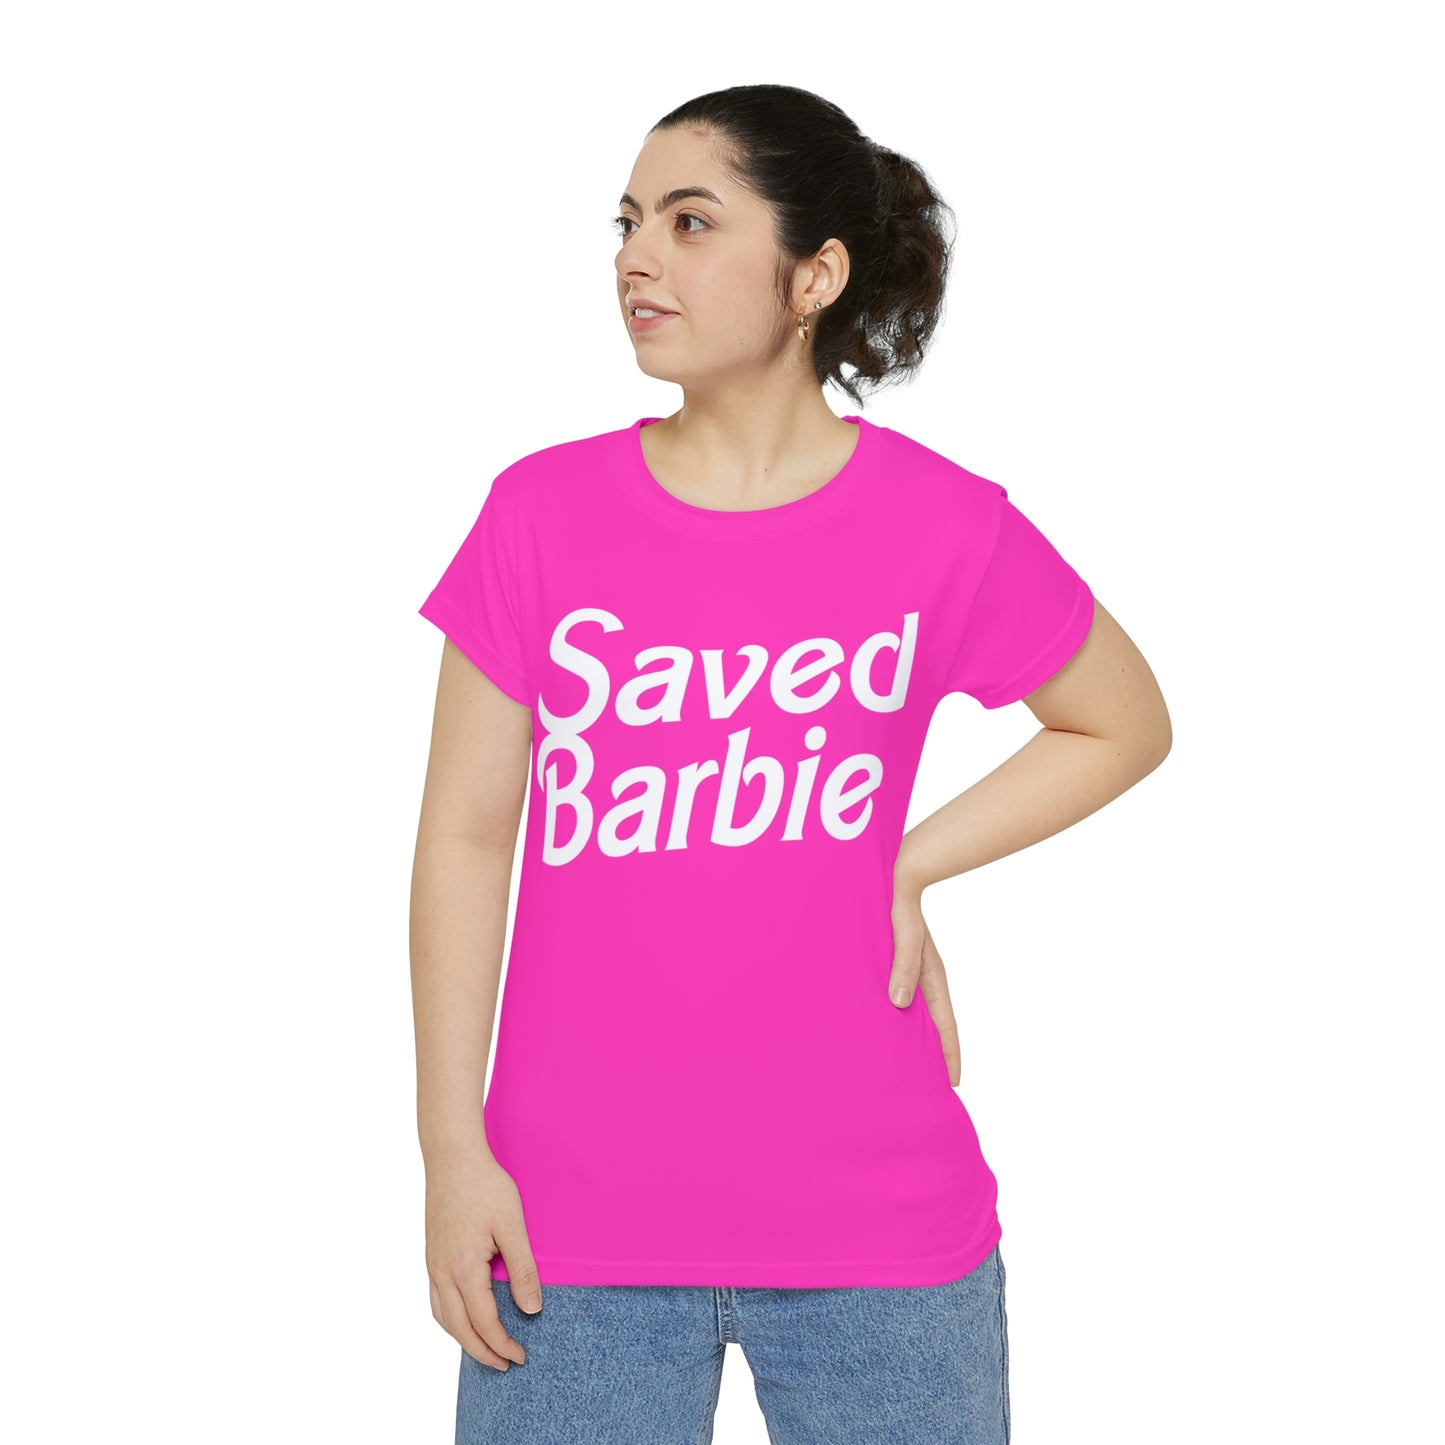 Saved Barbie, Bachelorette Party Shirts, Bridesmaid Gifts, Here comes the Party Tees, Group Party Favor Shirts, Bridal Party Shirt for women